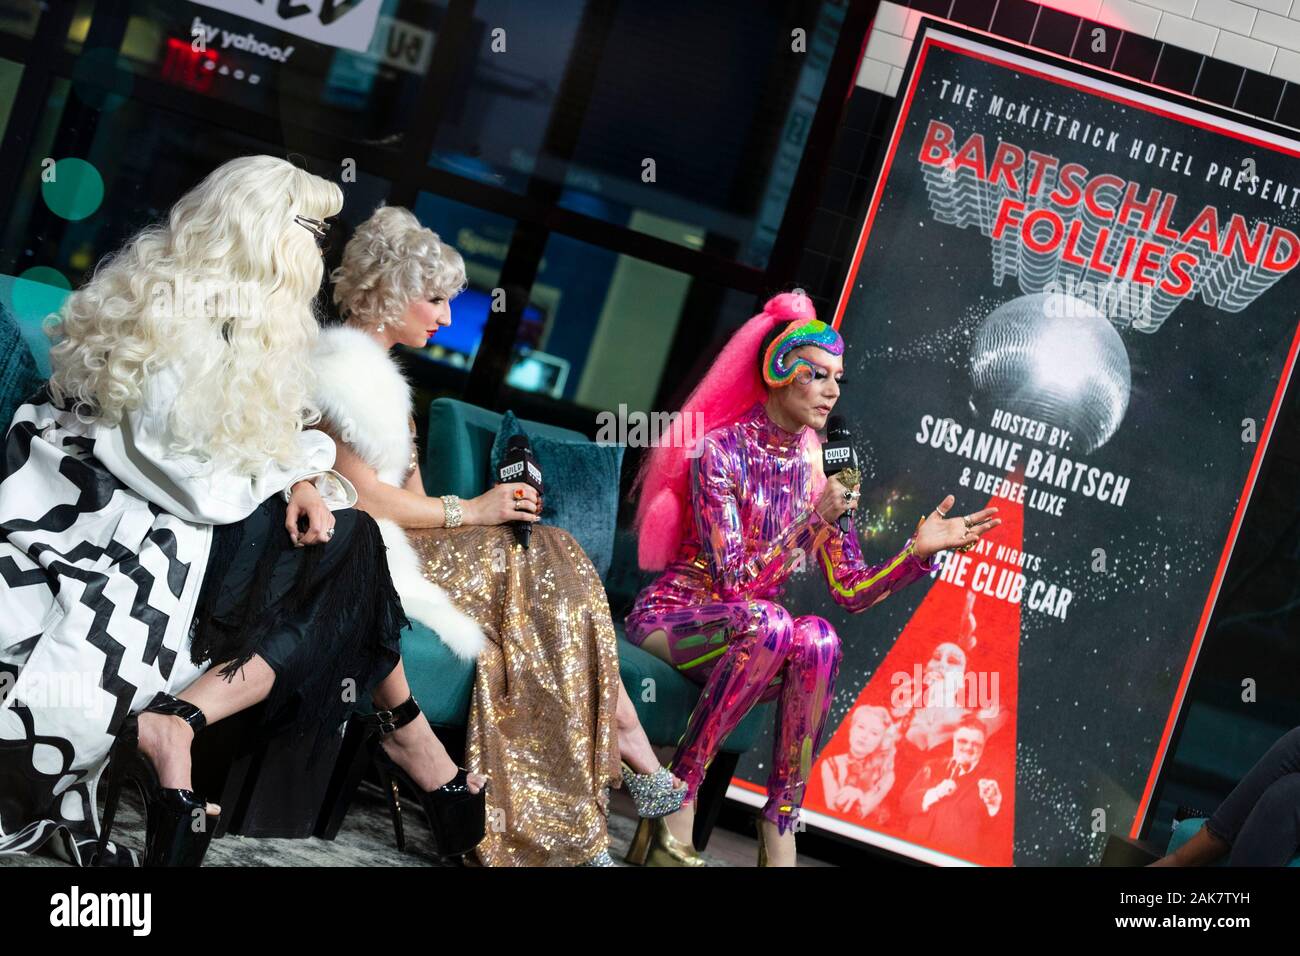 New York, NY, USA. 7 January, 2020. Lola Von Rox, Marcy Richardson, Susanne Bartsch at the BUILD Speaker Series: Discussing "Bartschland Follies" cabaret show at the Mckittrick Hotel at BUILD Studio. Credit: Steve Mack/Alamy Live News Stock Photo